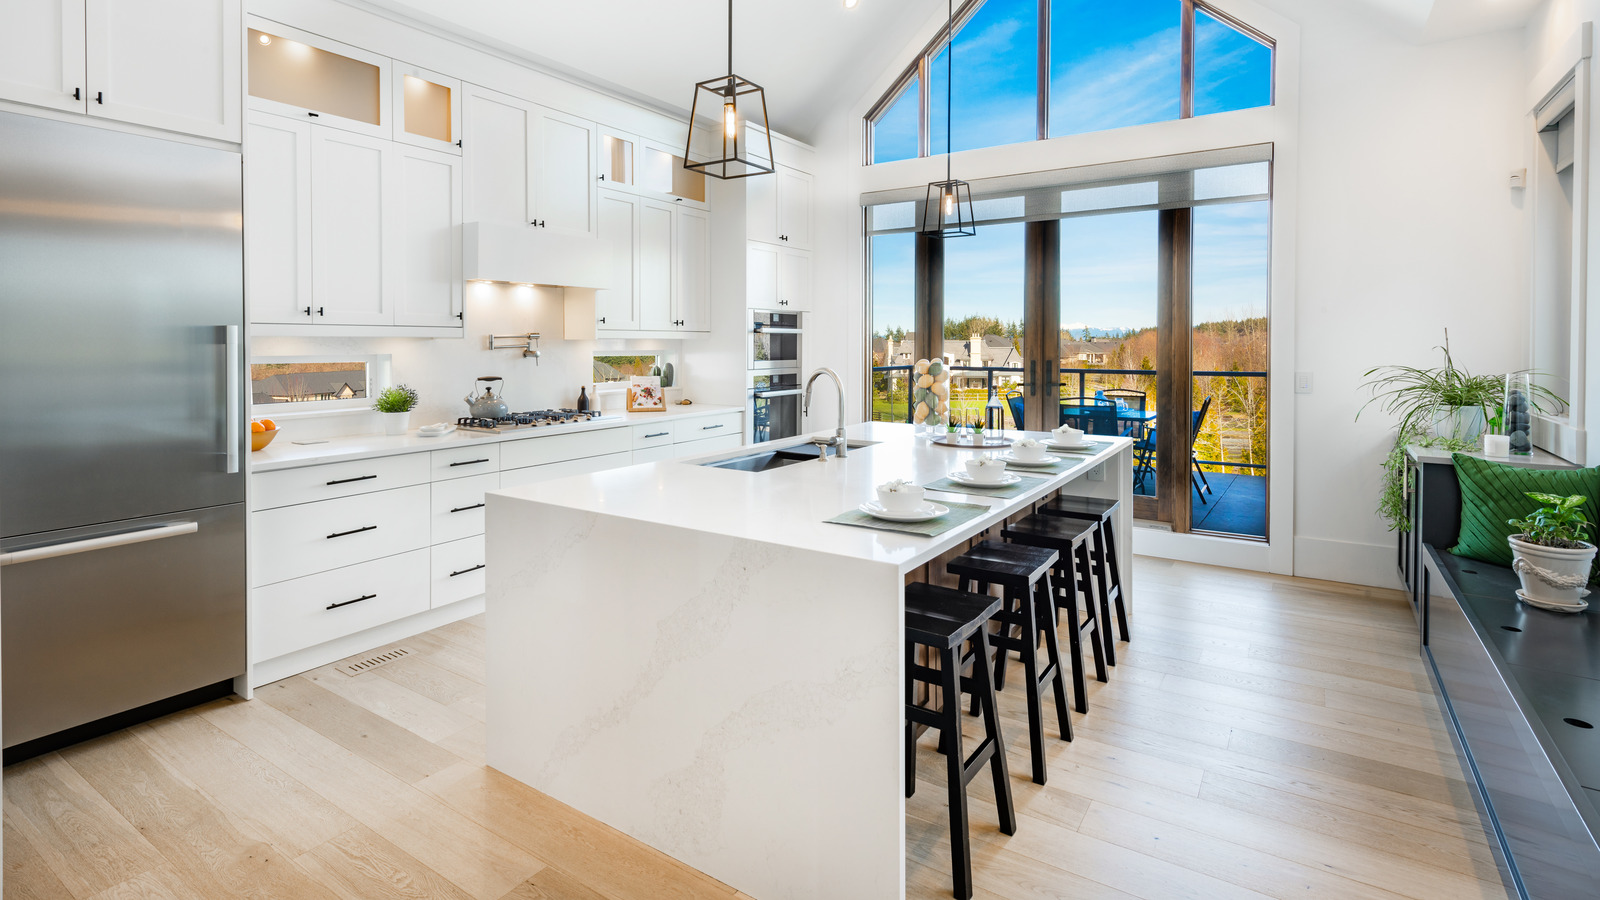 The Popular Kitchen Island Feature HGTV’s Hilary Farr Can’t Stand